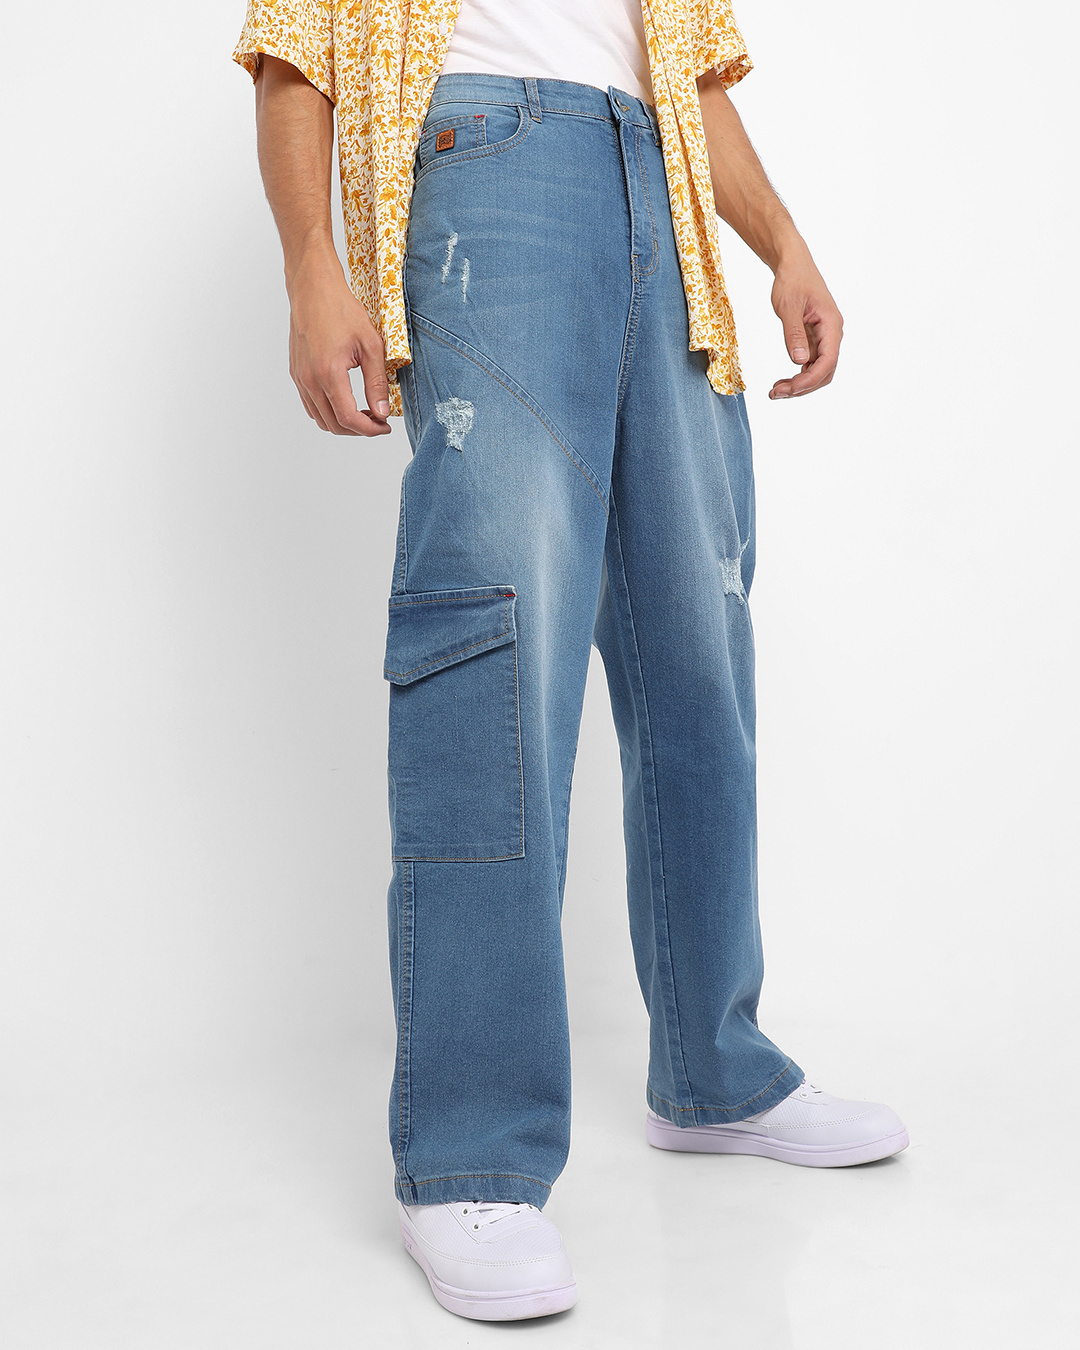 Buy Men's Blue Washed Baggy Distressed Cargo Jeans Online at Bewakoof